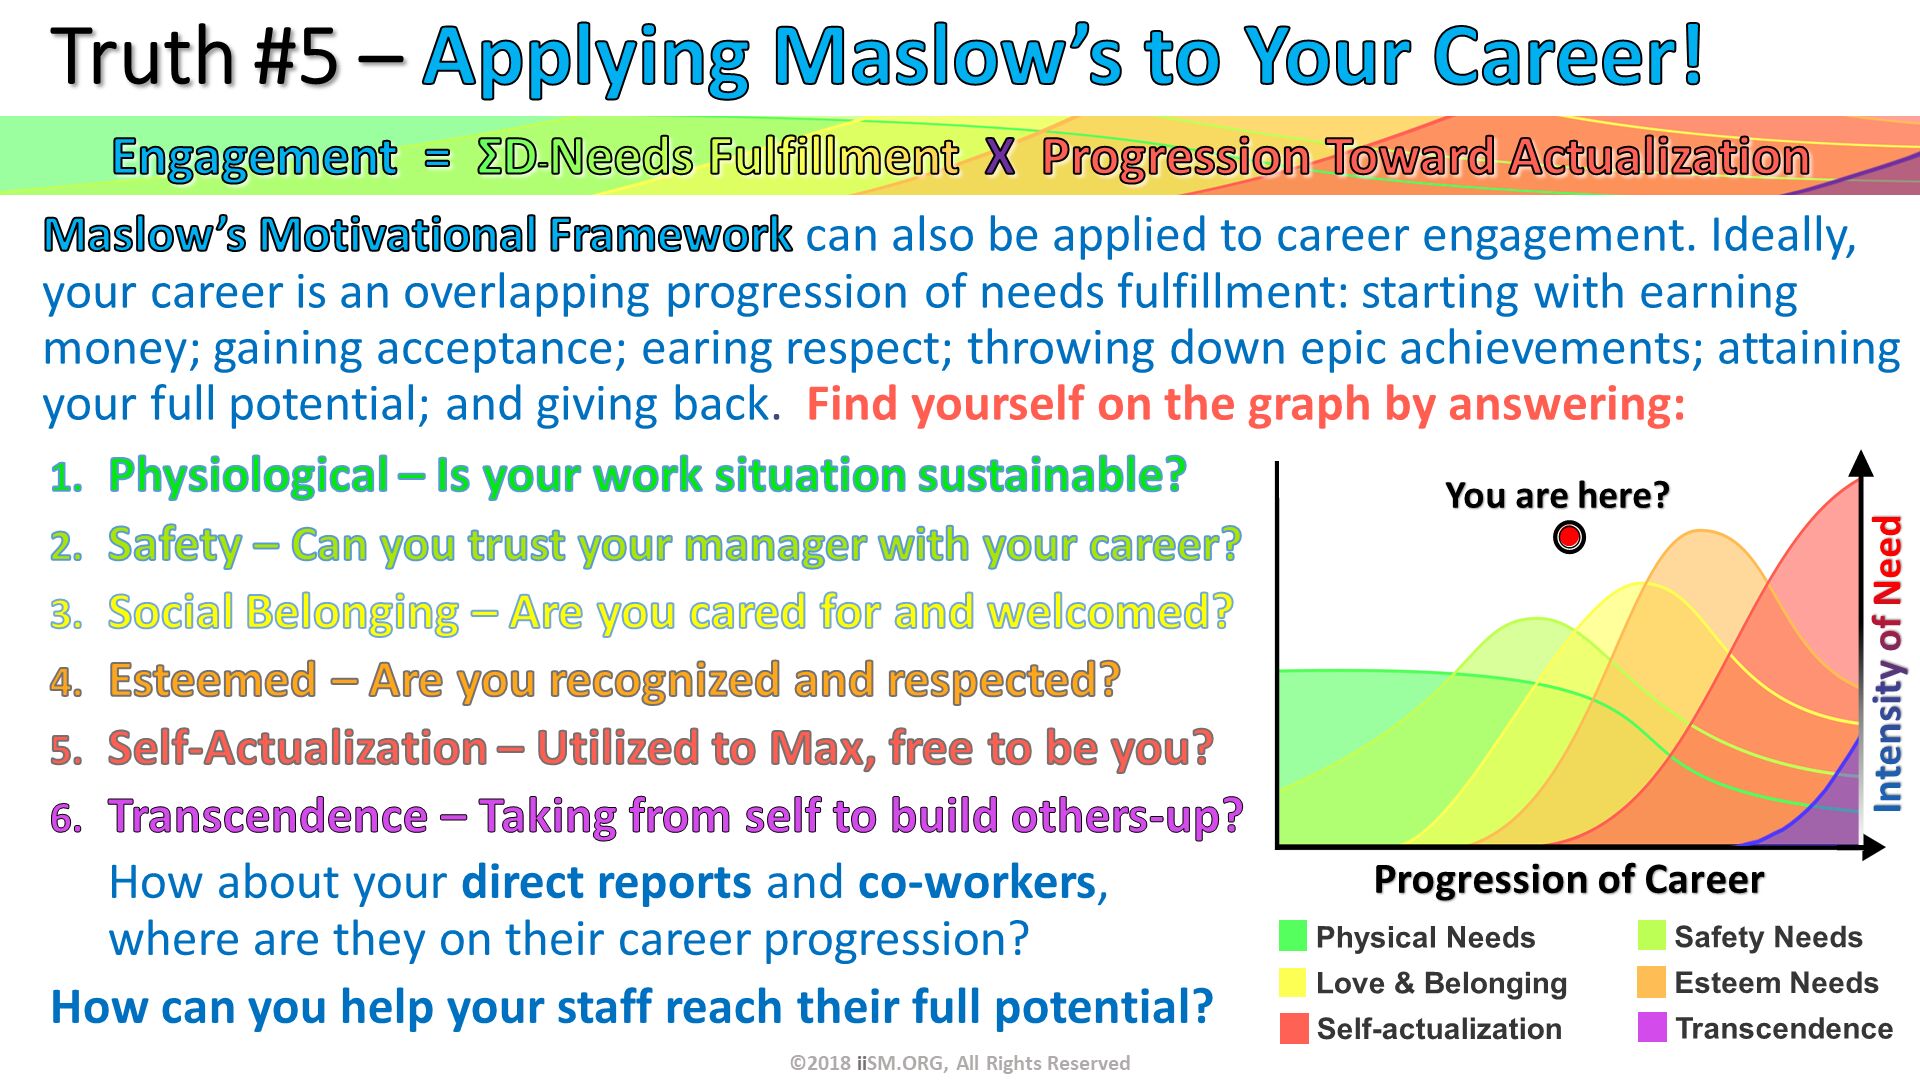 Maslow’s Motivational Framework can also be applied to career engagement. Ideally, your career is an overlapping progression of needs fulfillment: starting with earning money; gaining acceptance; earing respect; throwing down epic achievements; attaining your full potential; and giving back.  Find yourself on the graph by answering:

. Truth #5 – Applying Maslow’s to Your Career! . Physiological – Is your work situation sustainable?
Safety – Can you trust your manager with your career?
Social Belonging – Are you cared for and welcomed?
Esteemed – Are you recognized and respected?
Self-Actualization – Utilized to Max, free to be you?
Transcendence – Taking from self to build others-up?
How about your direct reports and co-workers, where are they on their career progression? 
How can you help your staff reach their full potential?
. ©2018 iiSM.ORG, All Rights Reserved. Engagement  =  ΣD-Needs Fulfillment  X  Progression Toward Actualization. 